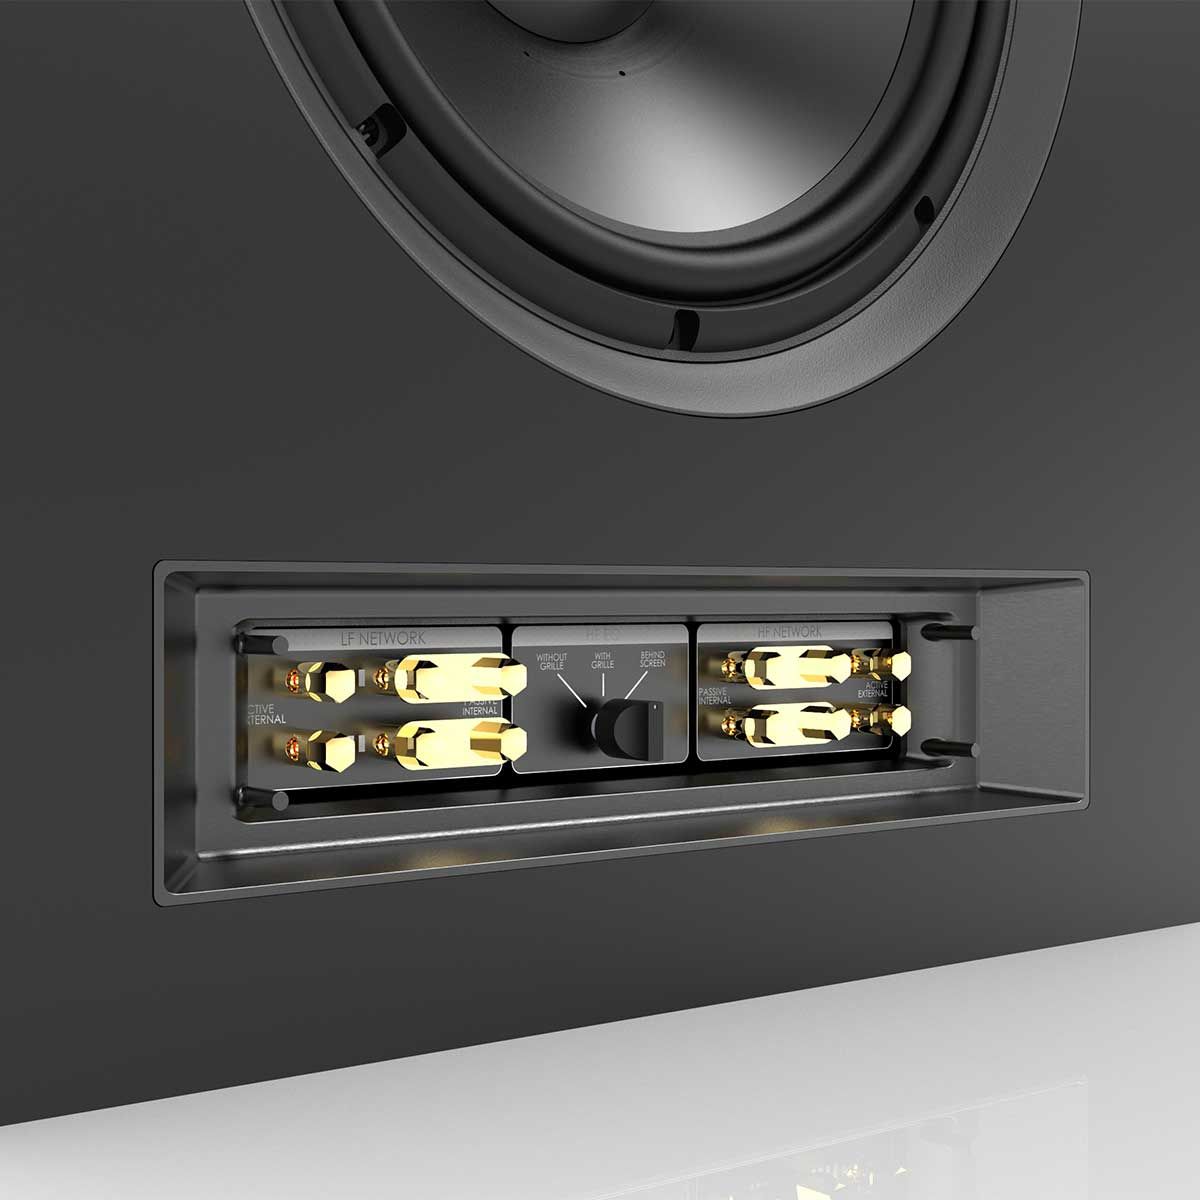 JBL Synthesis SCL-1 2-Way LCR Home Theater Speaker, Black, detailed view of controls with bottom panel removed